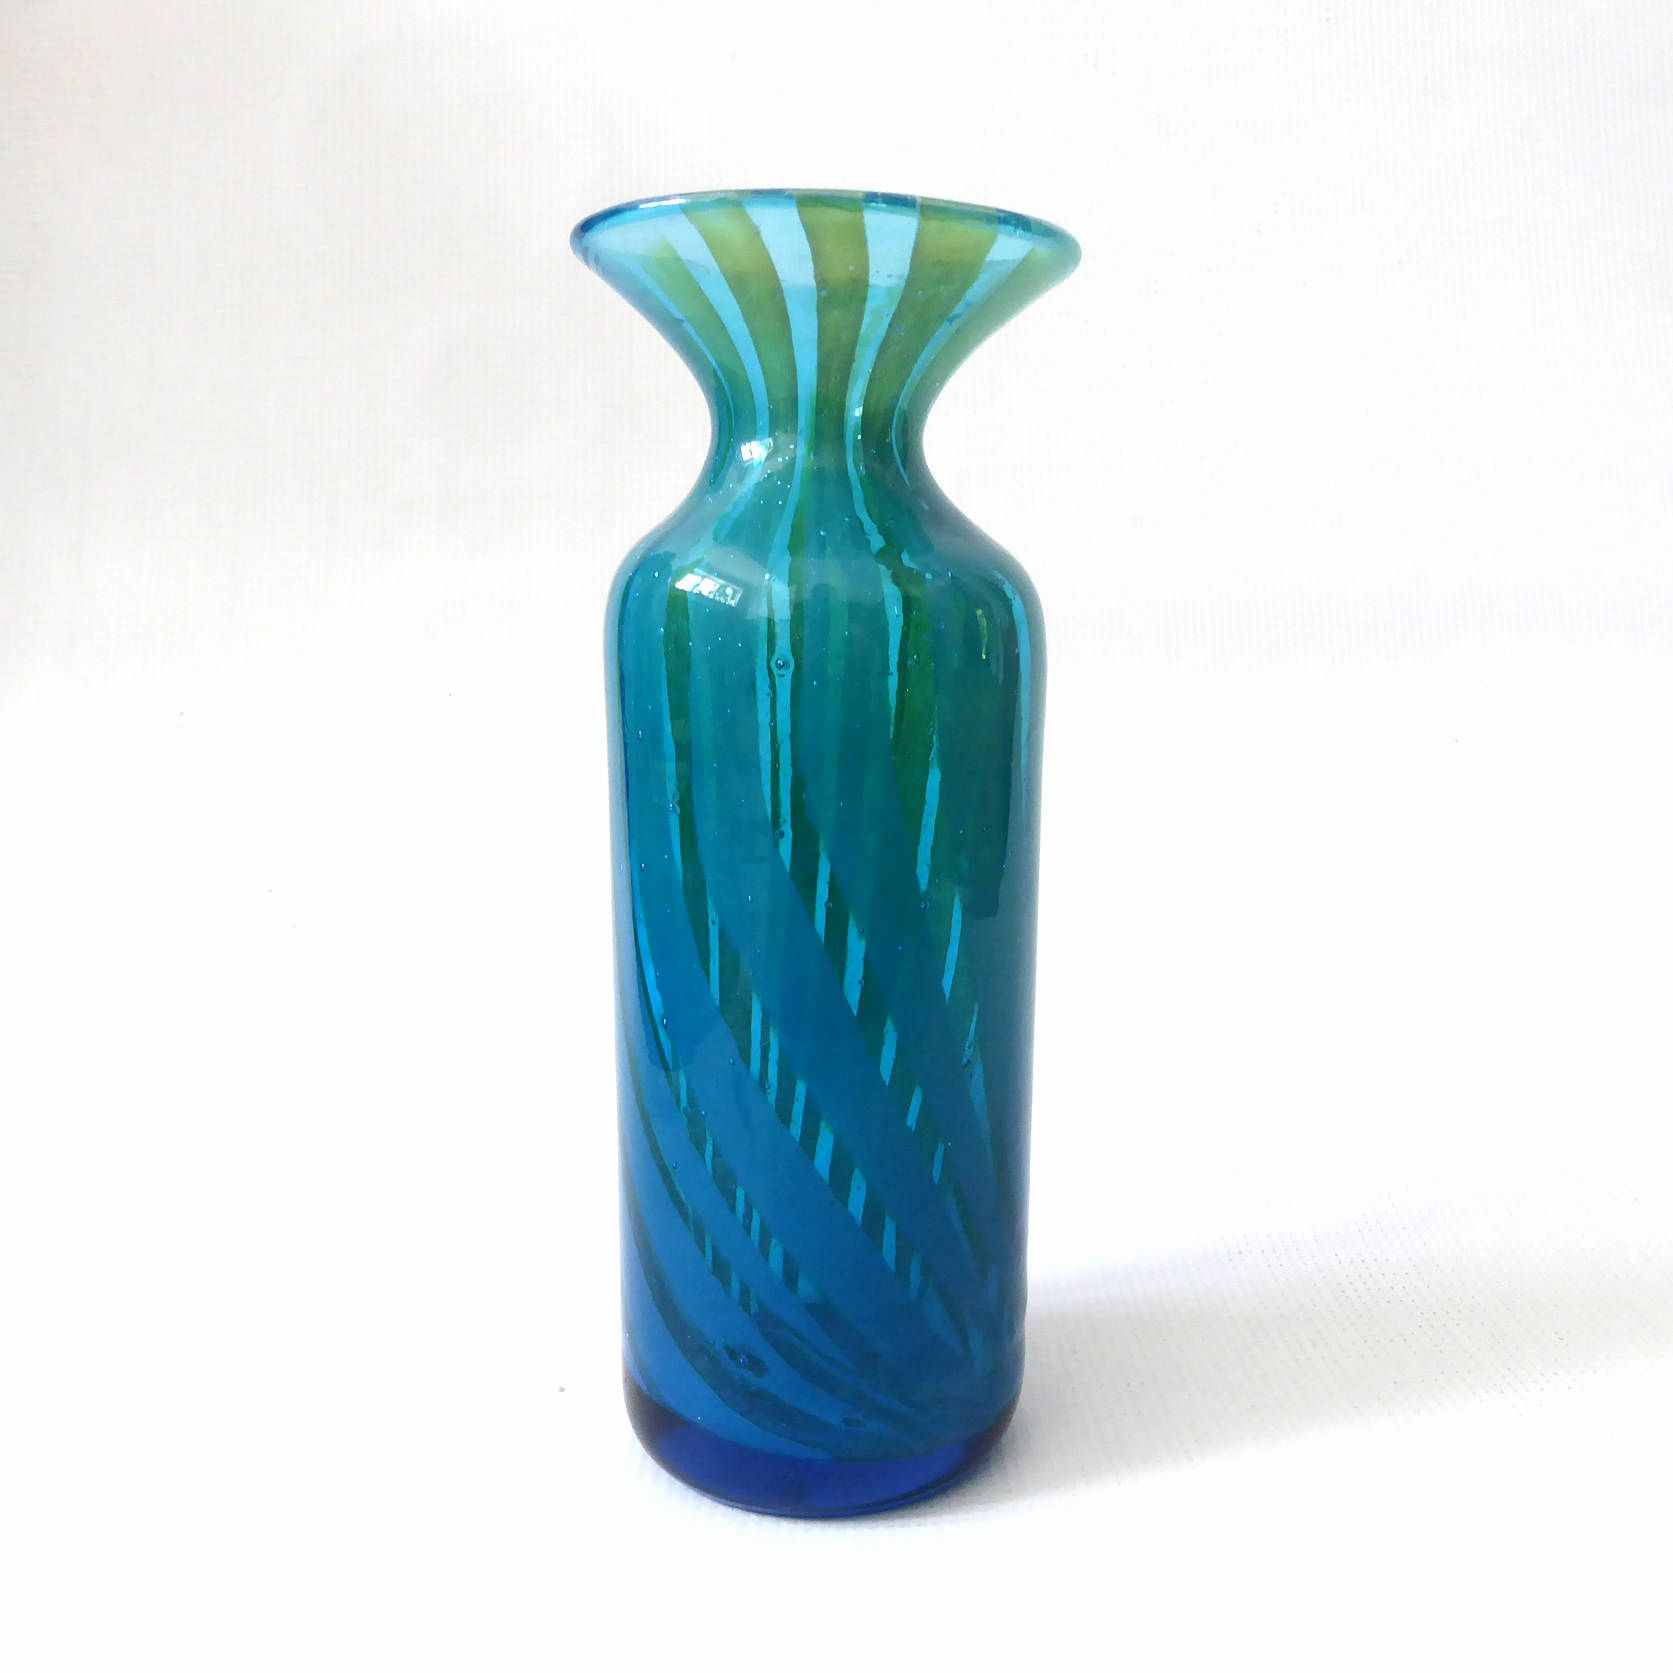 23 Popular Fenton Blue Glass Vase Antique 2024 free download fenton blue glass vase antique of 35 antique green glass vases the weekly world with antique glass vases identify vase and cellar image avorcor